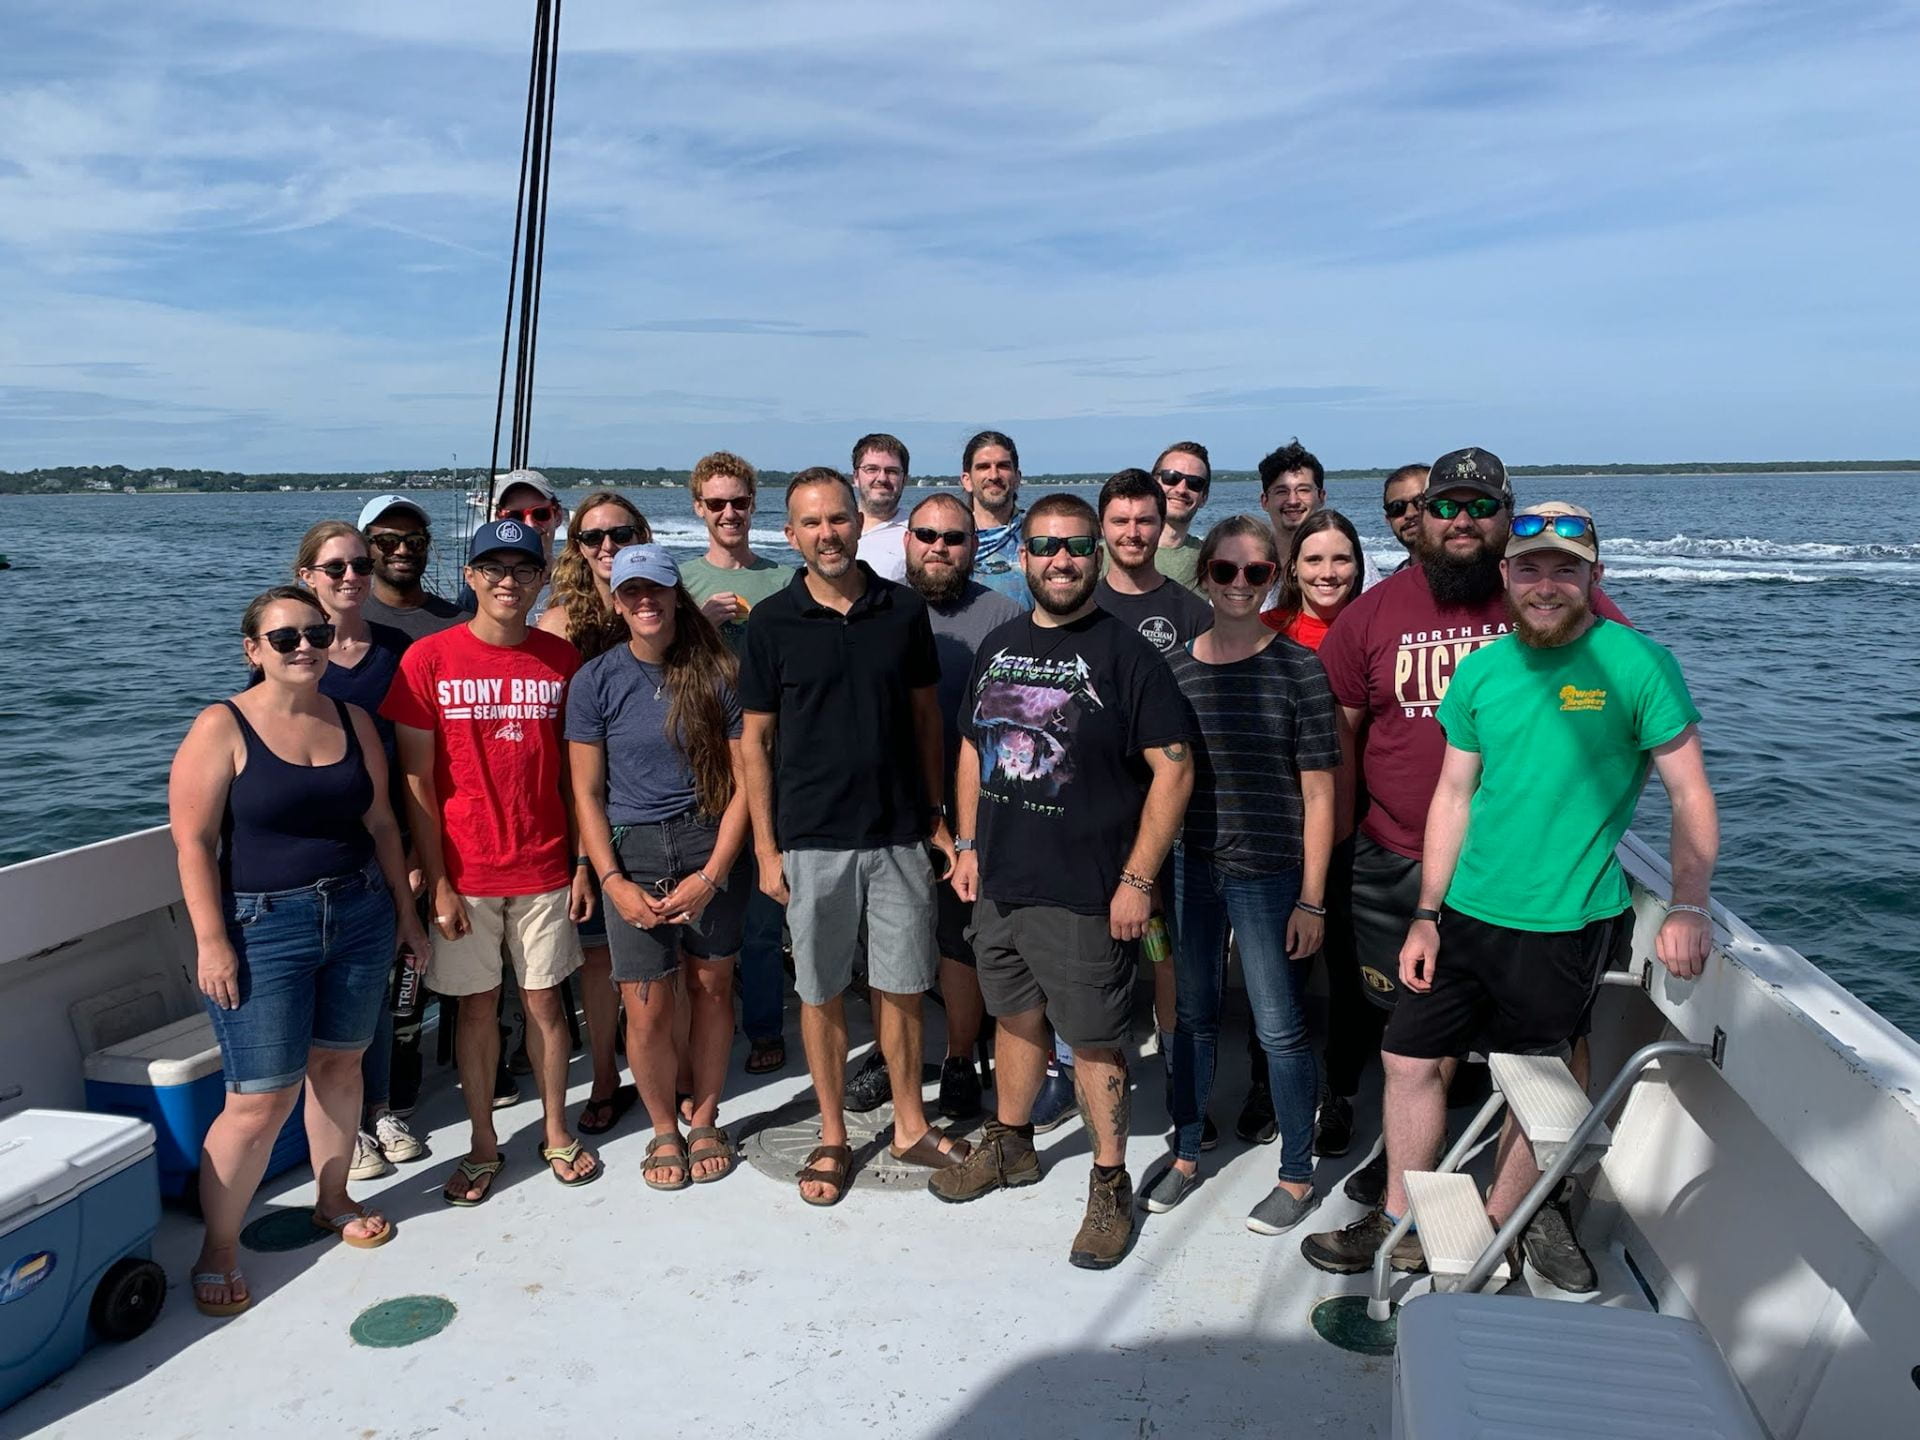 Our lab group standing on a boat during our annual lab fishing trip